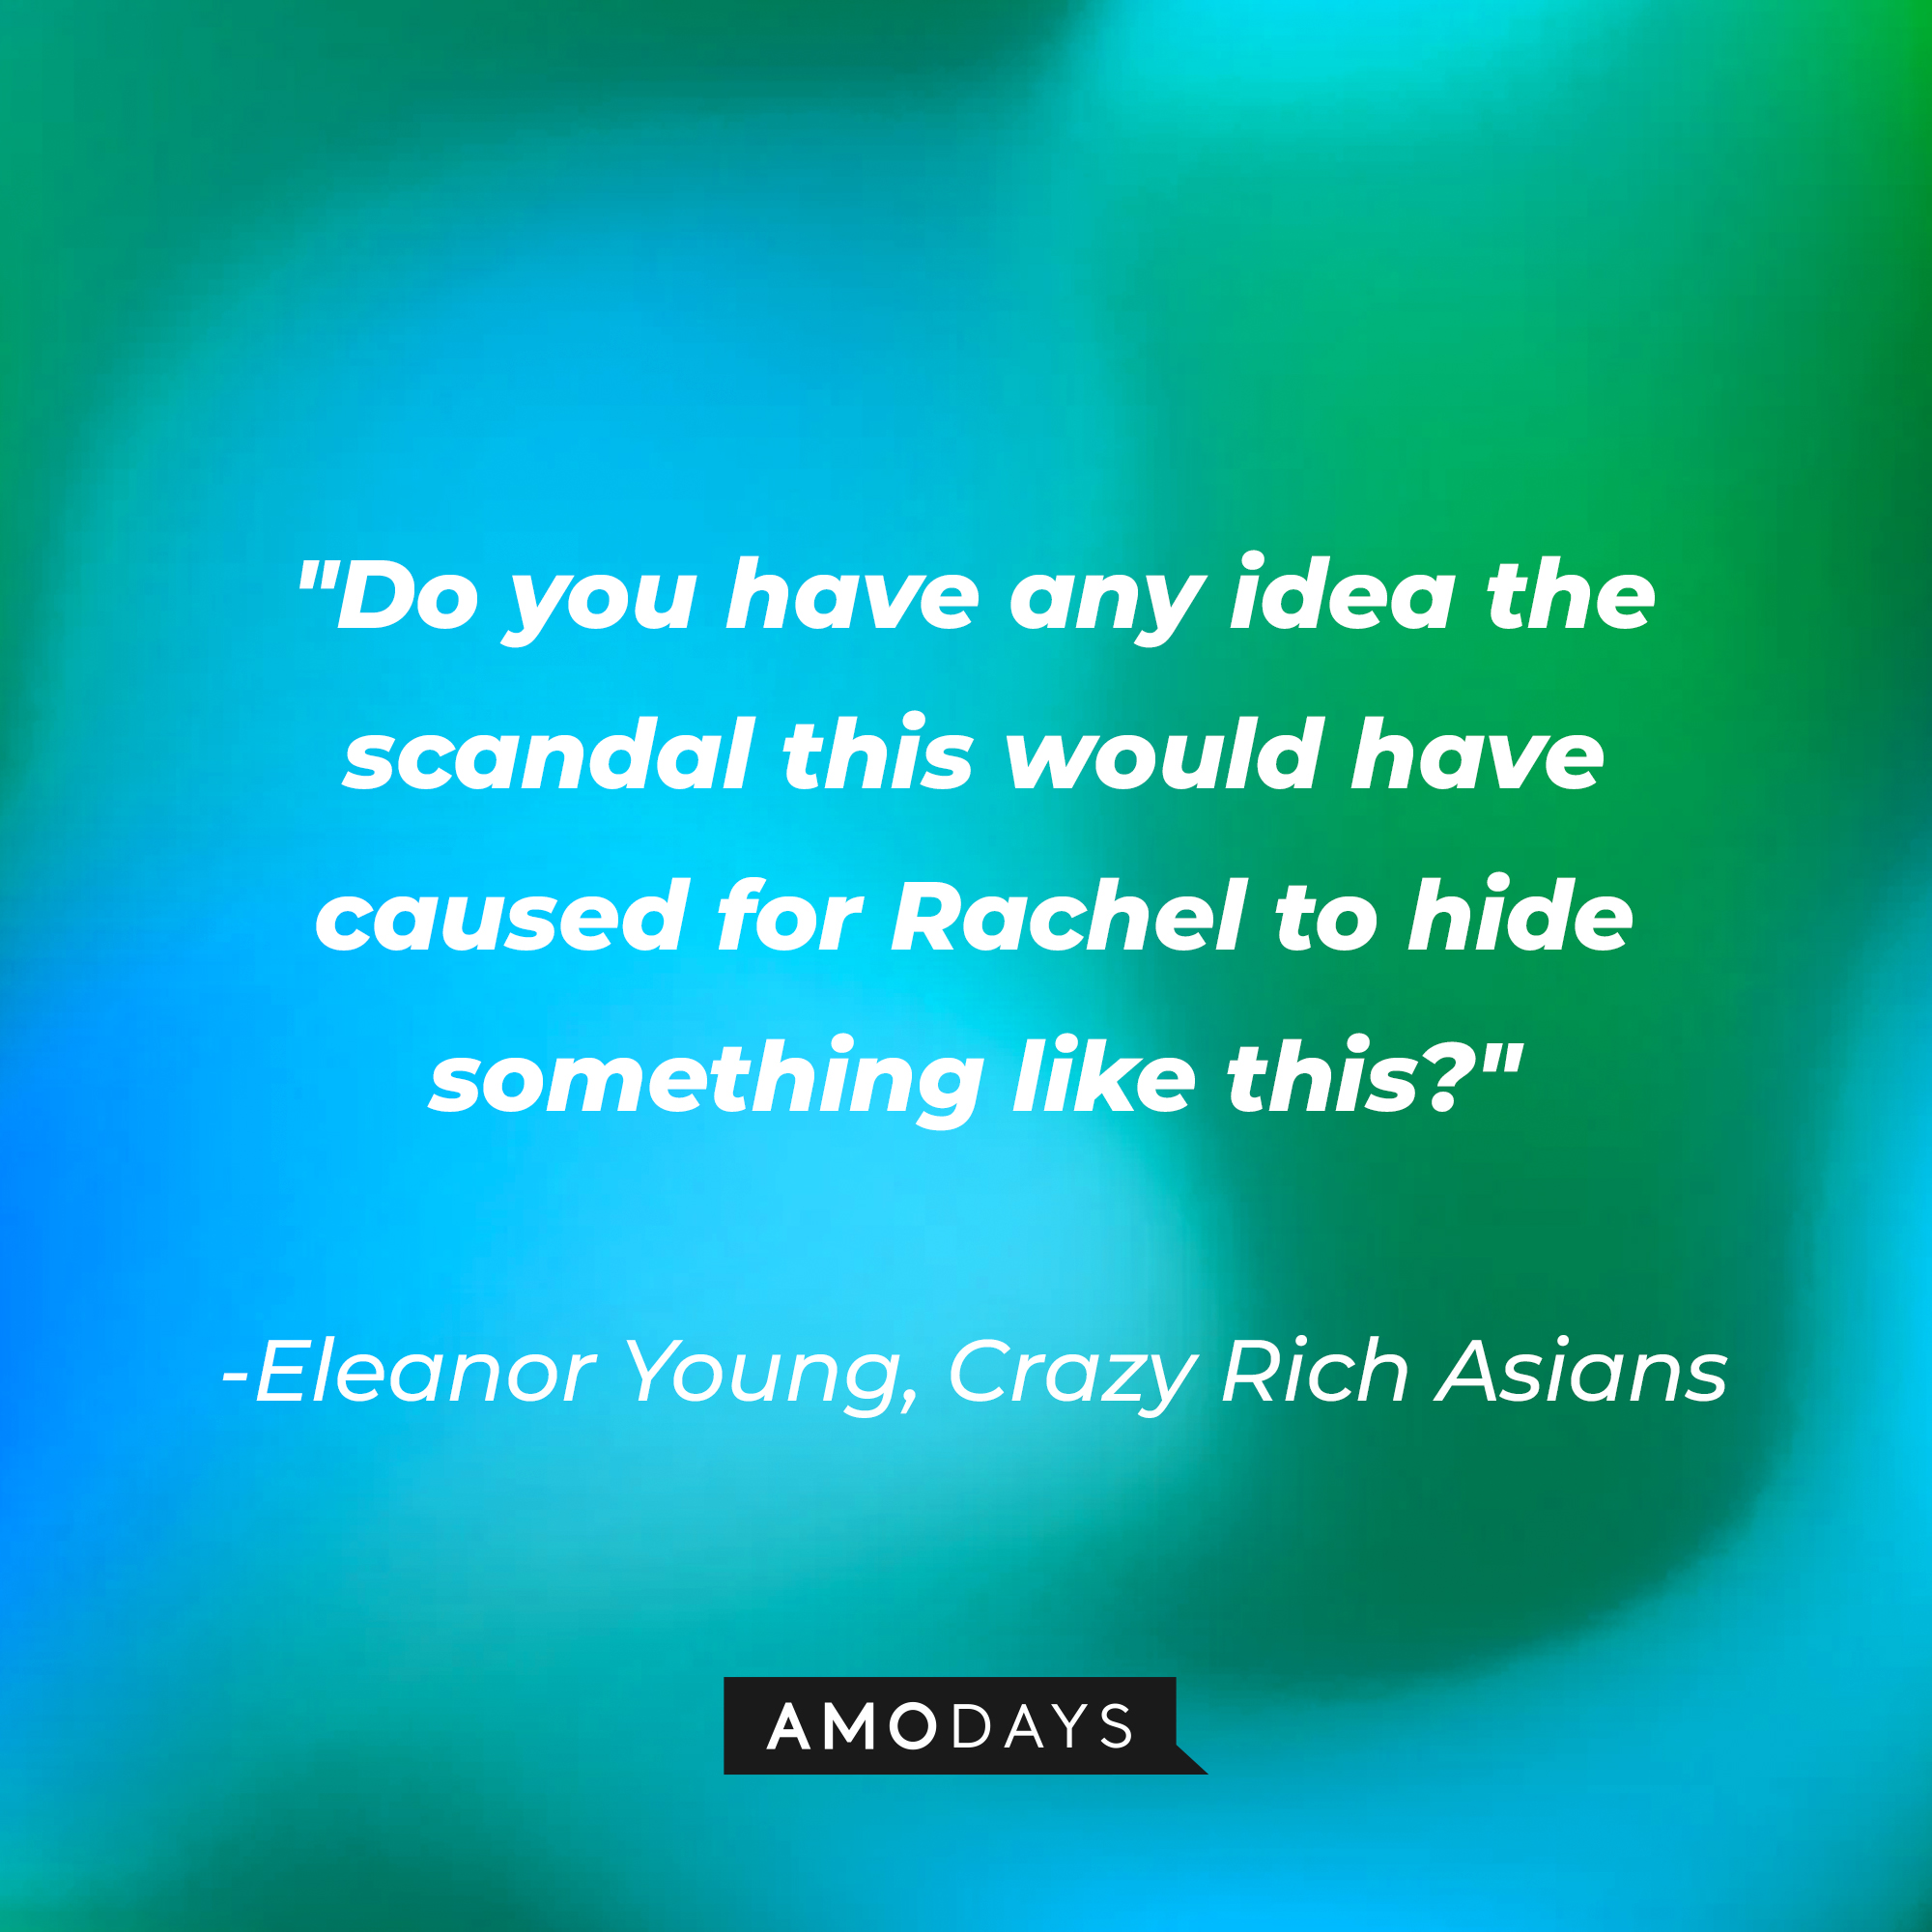 Eleanor Young's quote: "Do you have any idea the scandal this would have caused for Rachel to hide something like this?" | Source: AmoDays